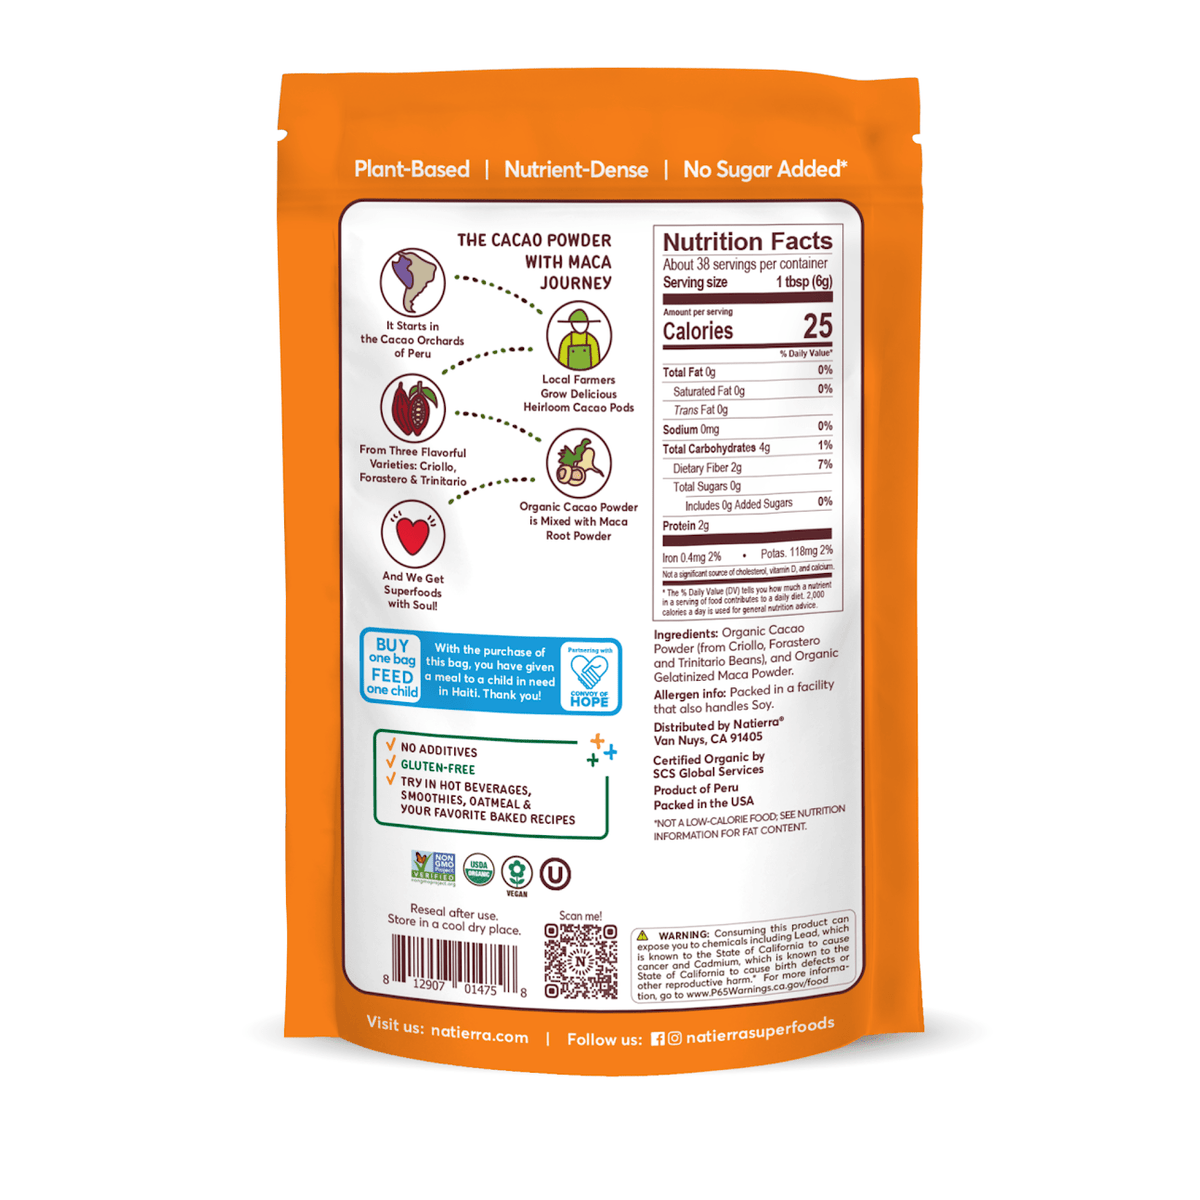 Natierra Organic Cacao With Maca bag with nutrition facts, journey and main product claims